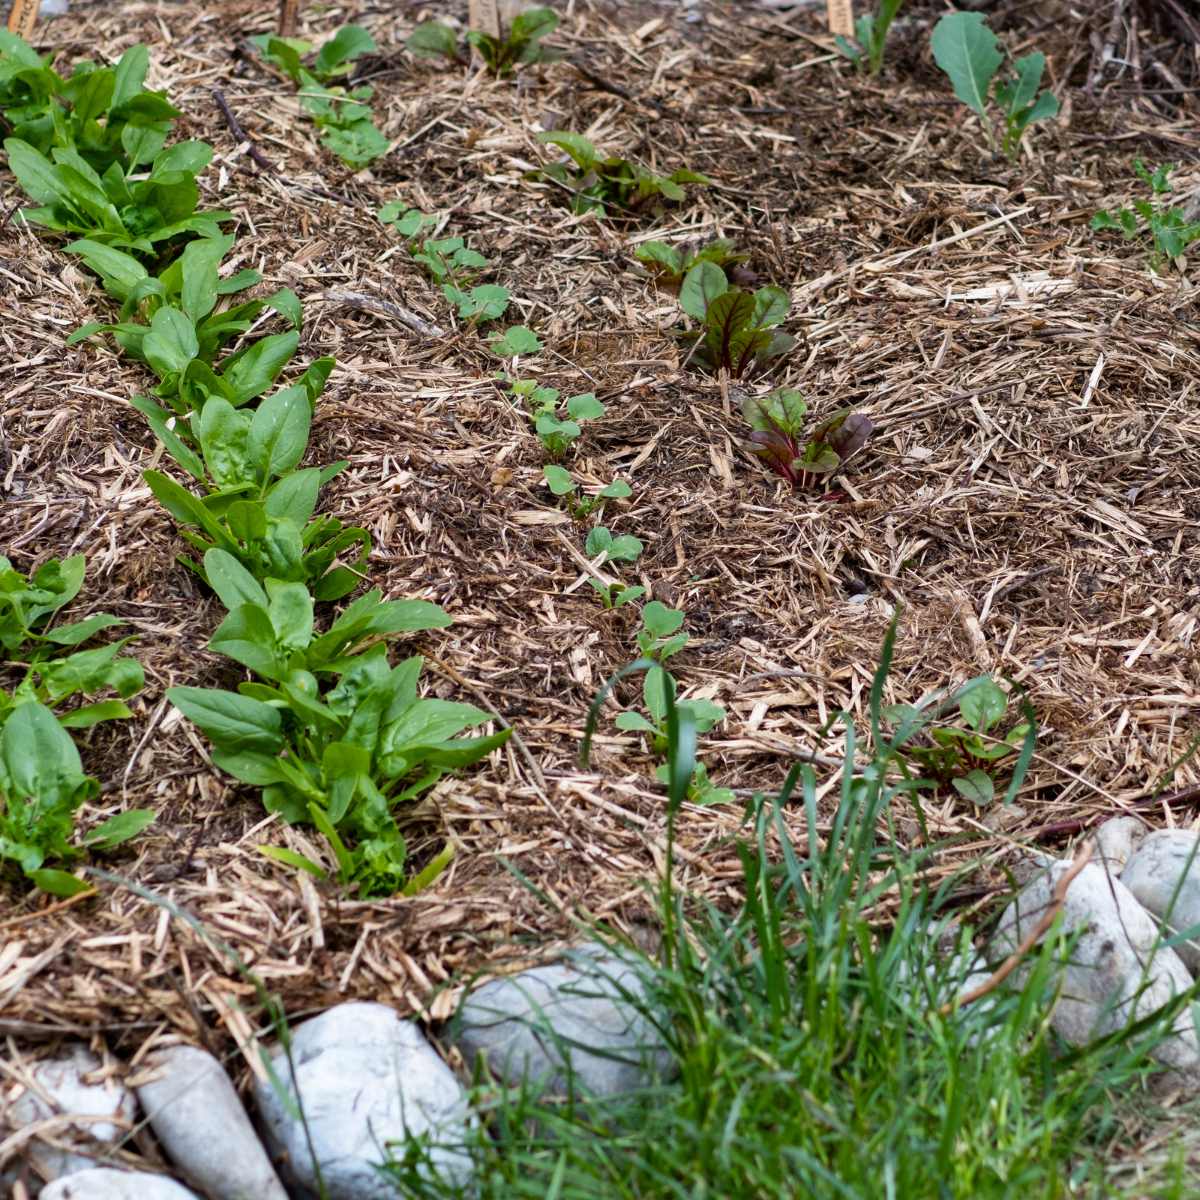 rows of garden greens with straw mulch to prevent weeds